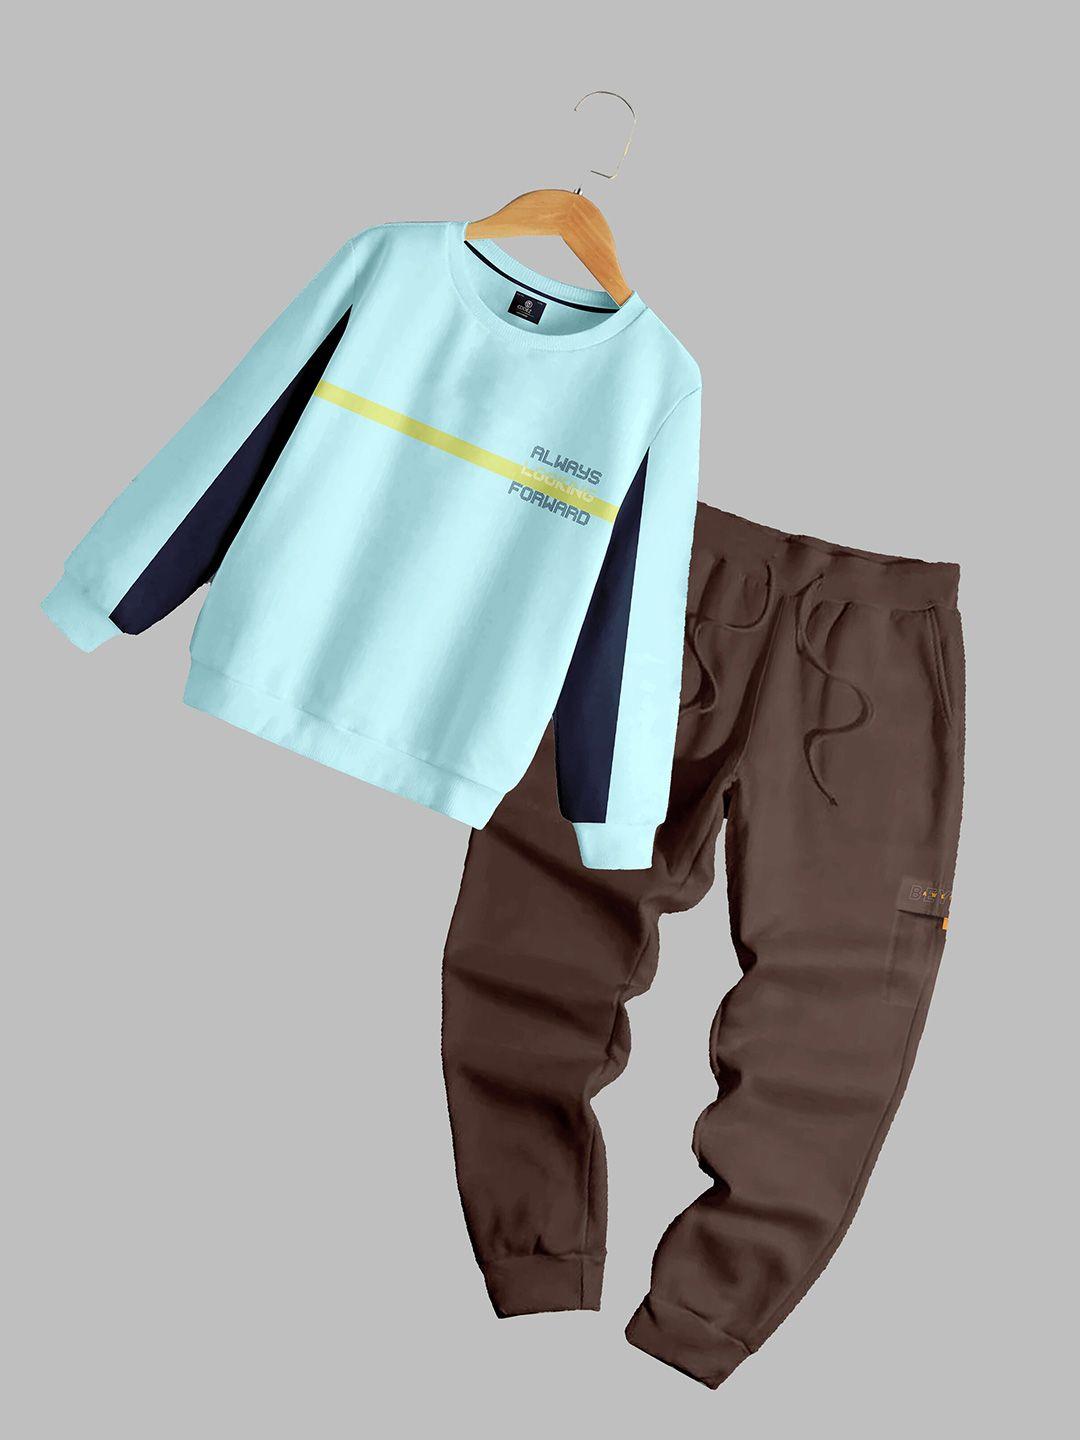 BAESD Boys Printed T-shirt With Trousers